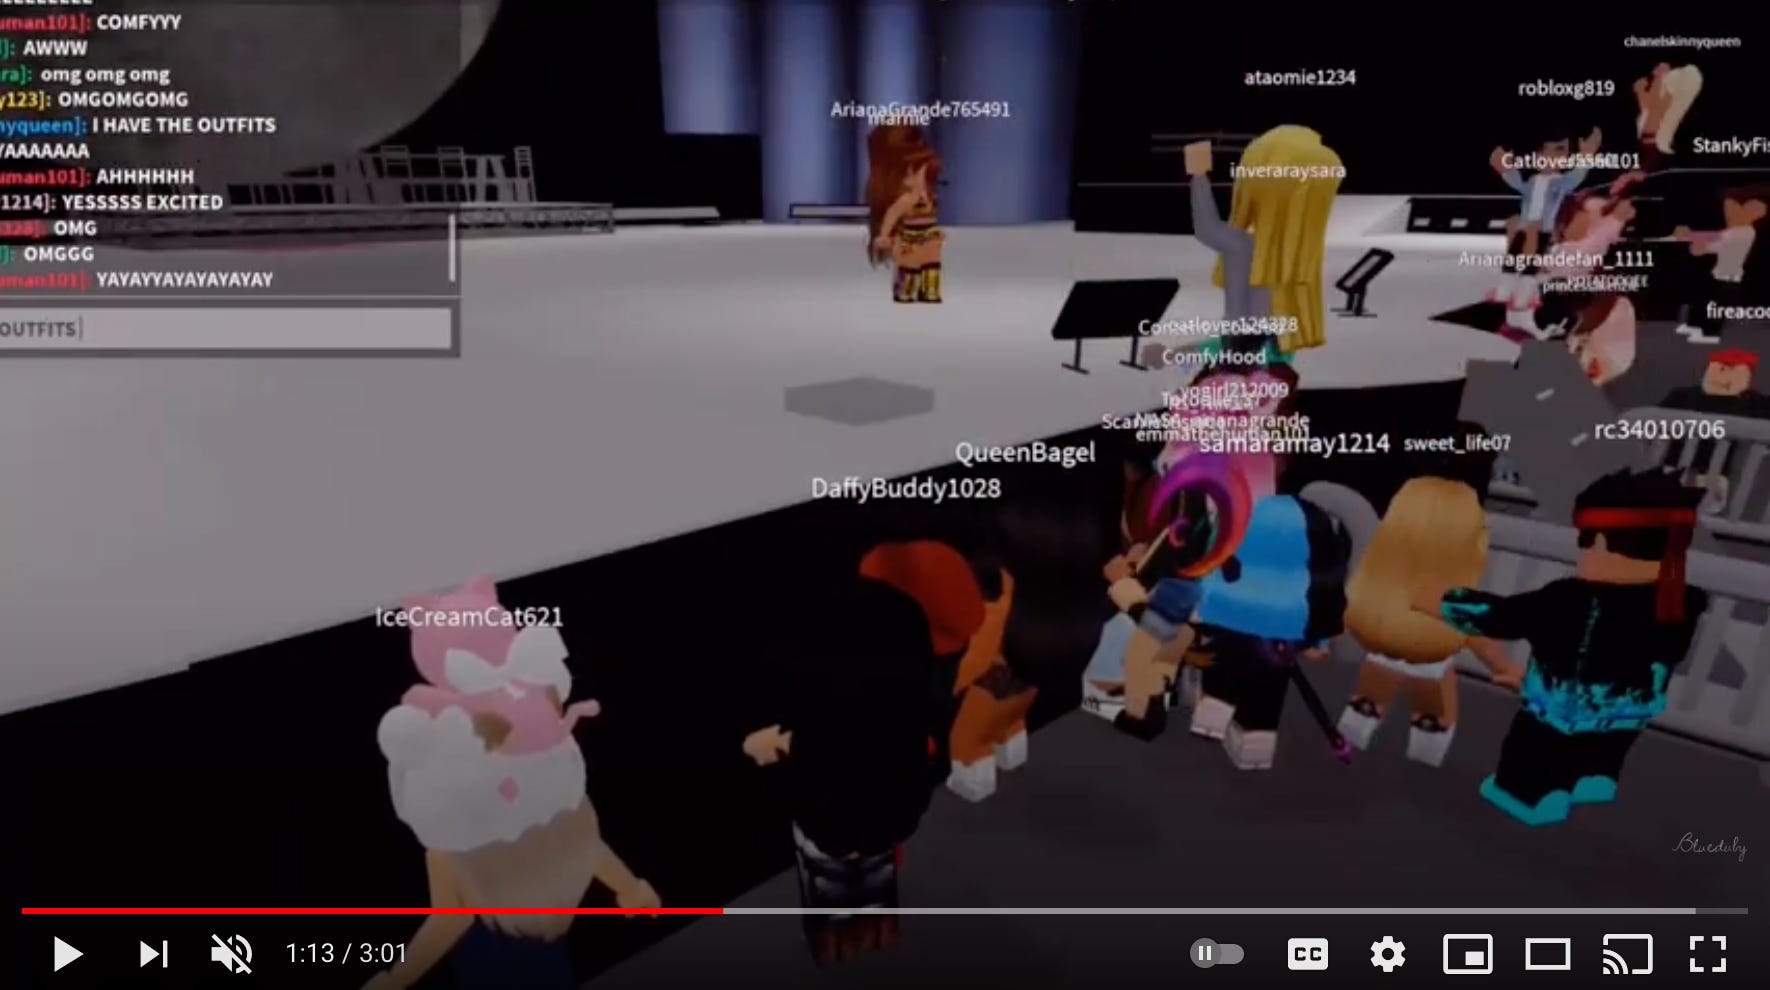 Insane Companies No One Everyone Talks About Episode 3 Roblox By Julie Young Julie Young S Newsletter - ariana grande roblox avatar